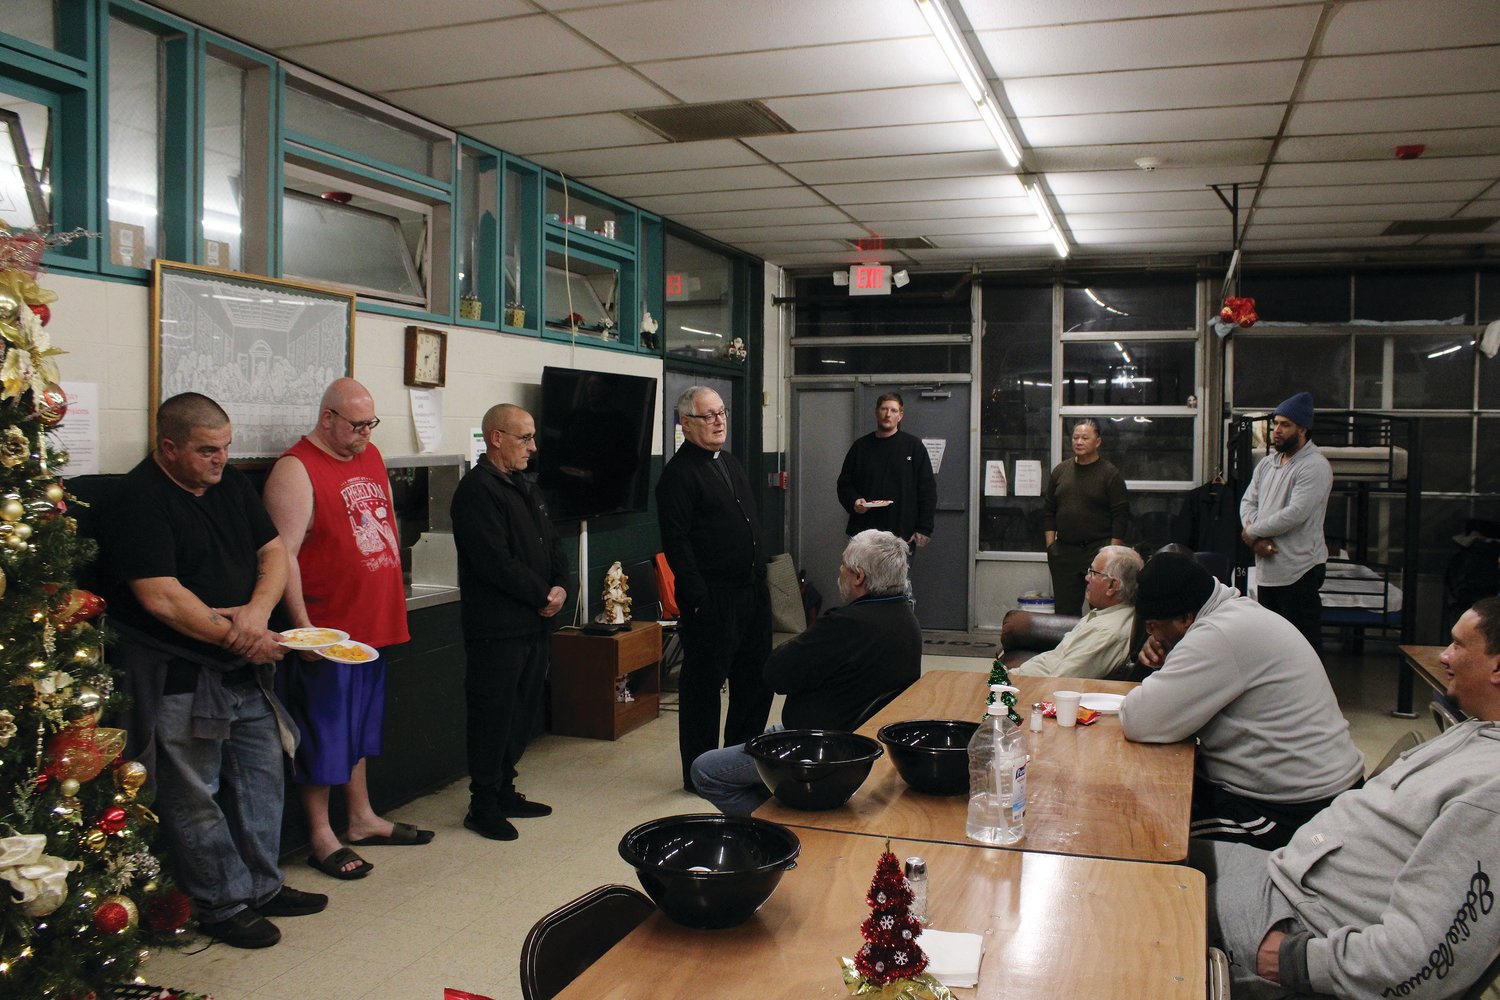 Bishop Thomas J. Tobin visited the diocesan Emmanuel House homeless shelter on December 19 to lead a short prayer service where he offered a blessing upon shelter guests and presented them with gifts at the annual Christmas party. Emmanuel House, which helps provide shelter for approximately 20,000 people per year, is also to some extent a community effort. Although founded and operated by the diocese, those involved with the shelter will frequently work with local government leaders to help carry out its mission.